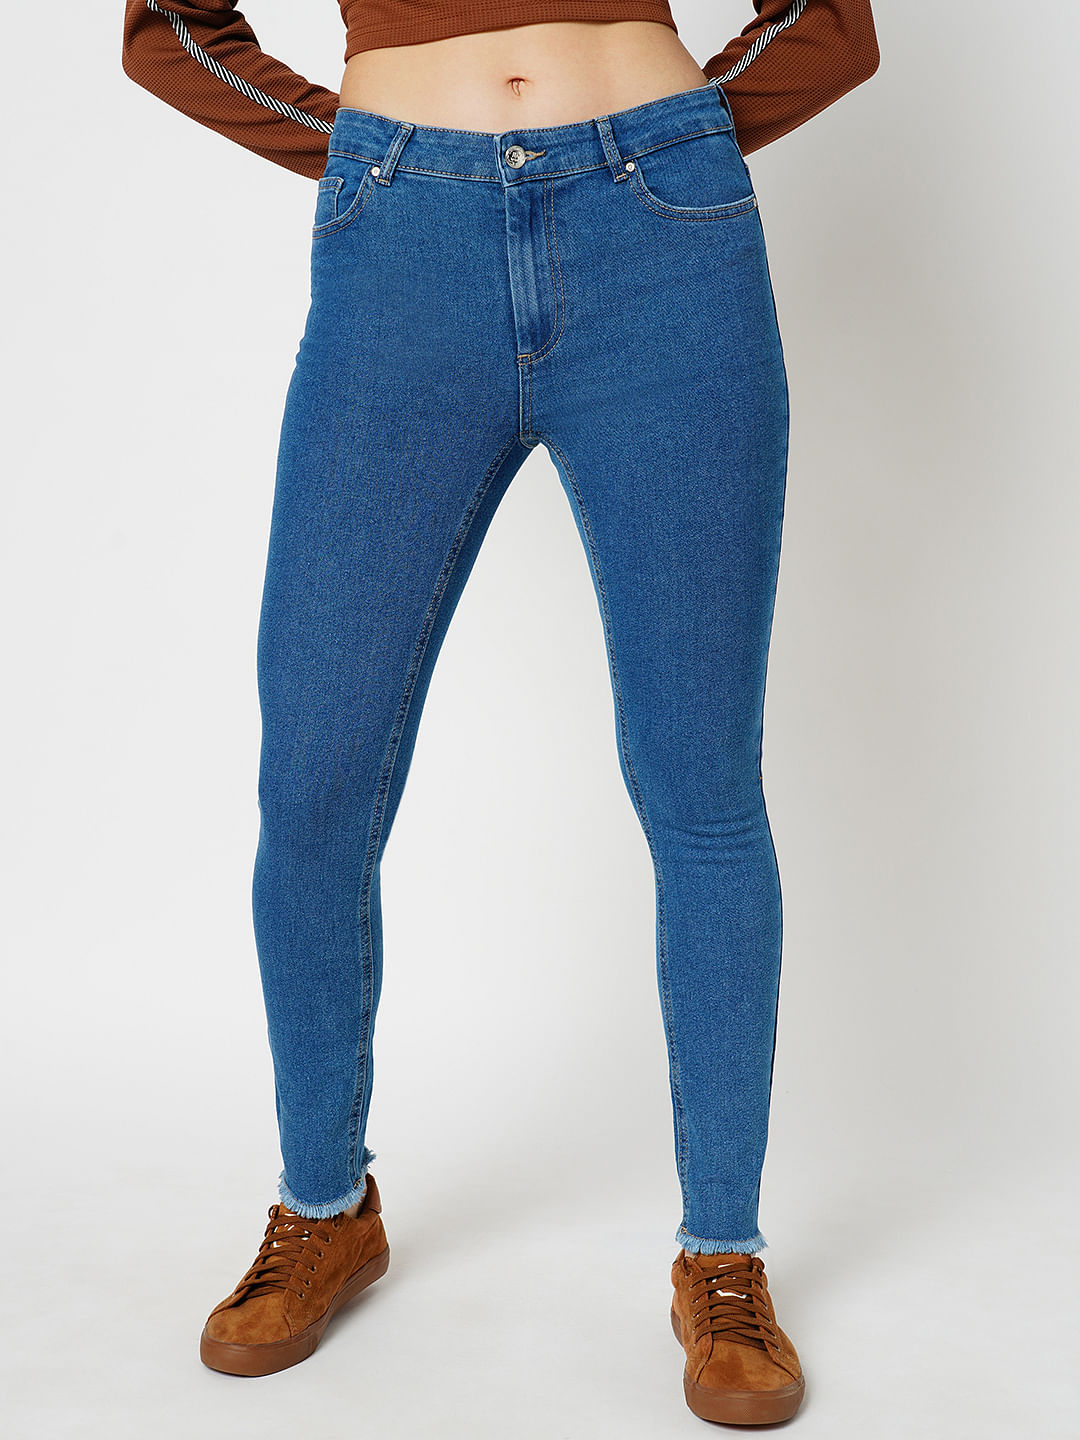 Shop Jdy High Waisted Skinny Jeans for Women up to 70% Off | DealDoodle